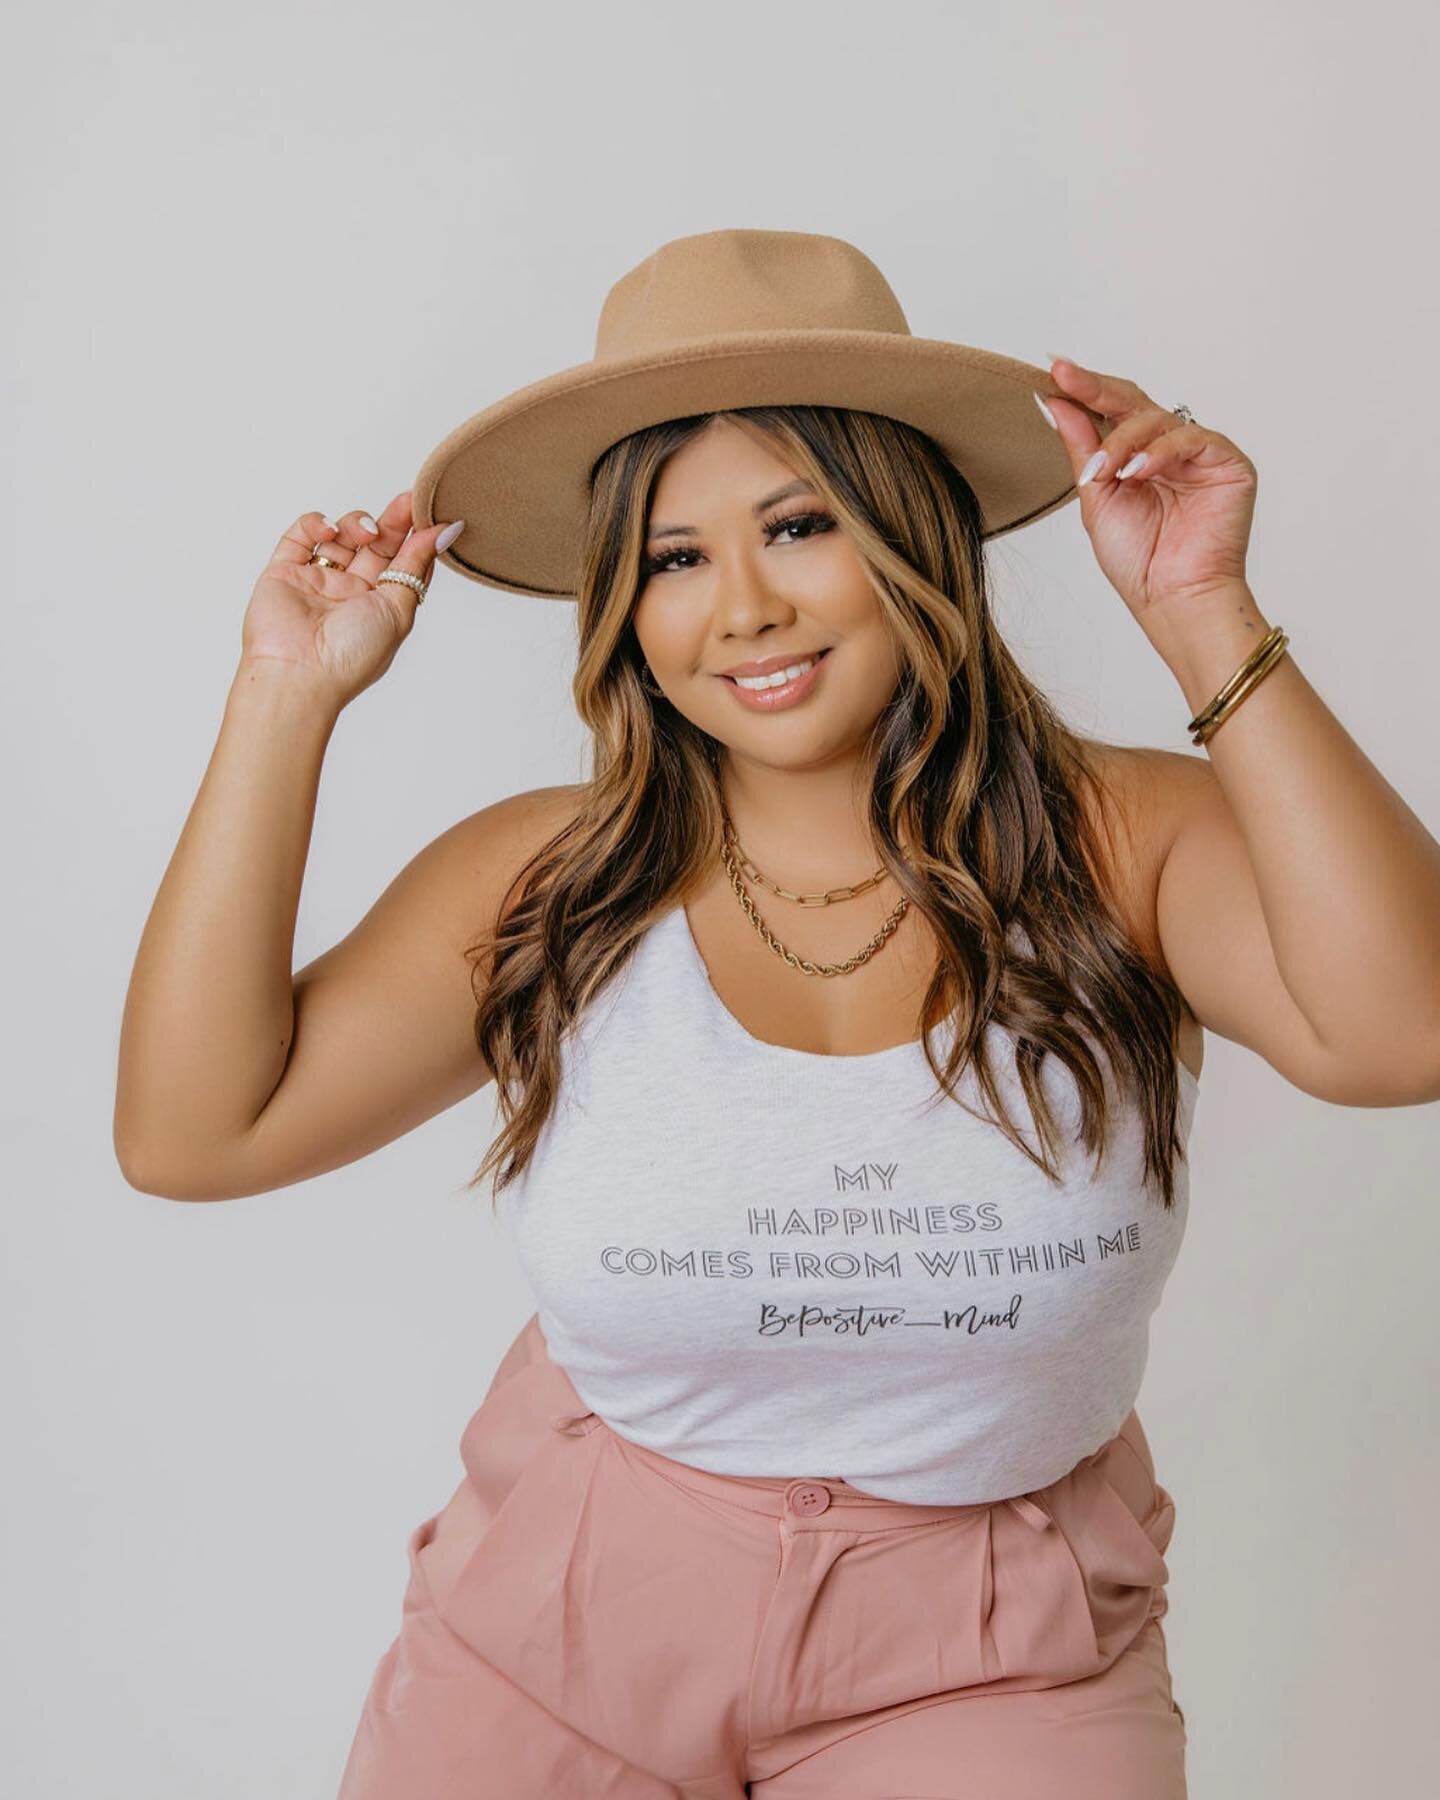 &ldquo;My happiness comes from within me&rdquo; &mdash; @bepositive_mind 

@thecherellemarie is such a beautiful soul. Her positive aura speaks volumes. Cherelle is a mental health advocate, she has fought her own mental health battles. 
@thecherelle